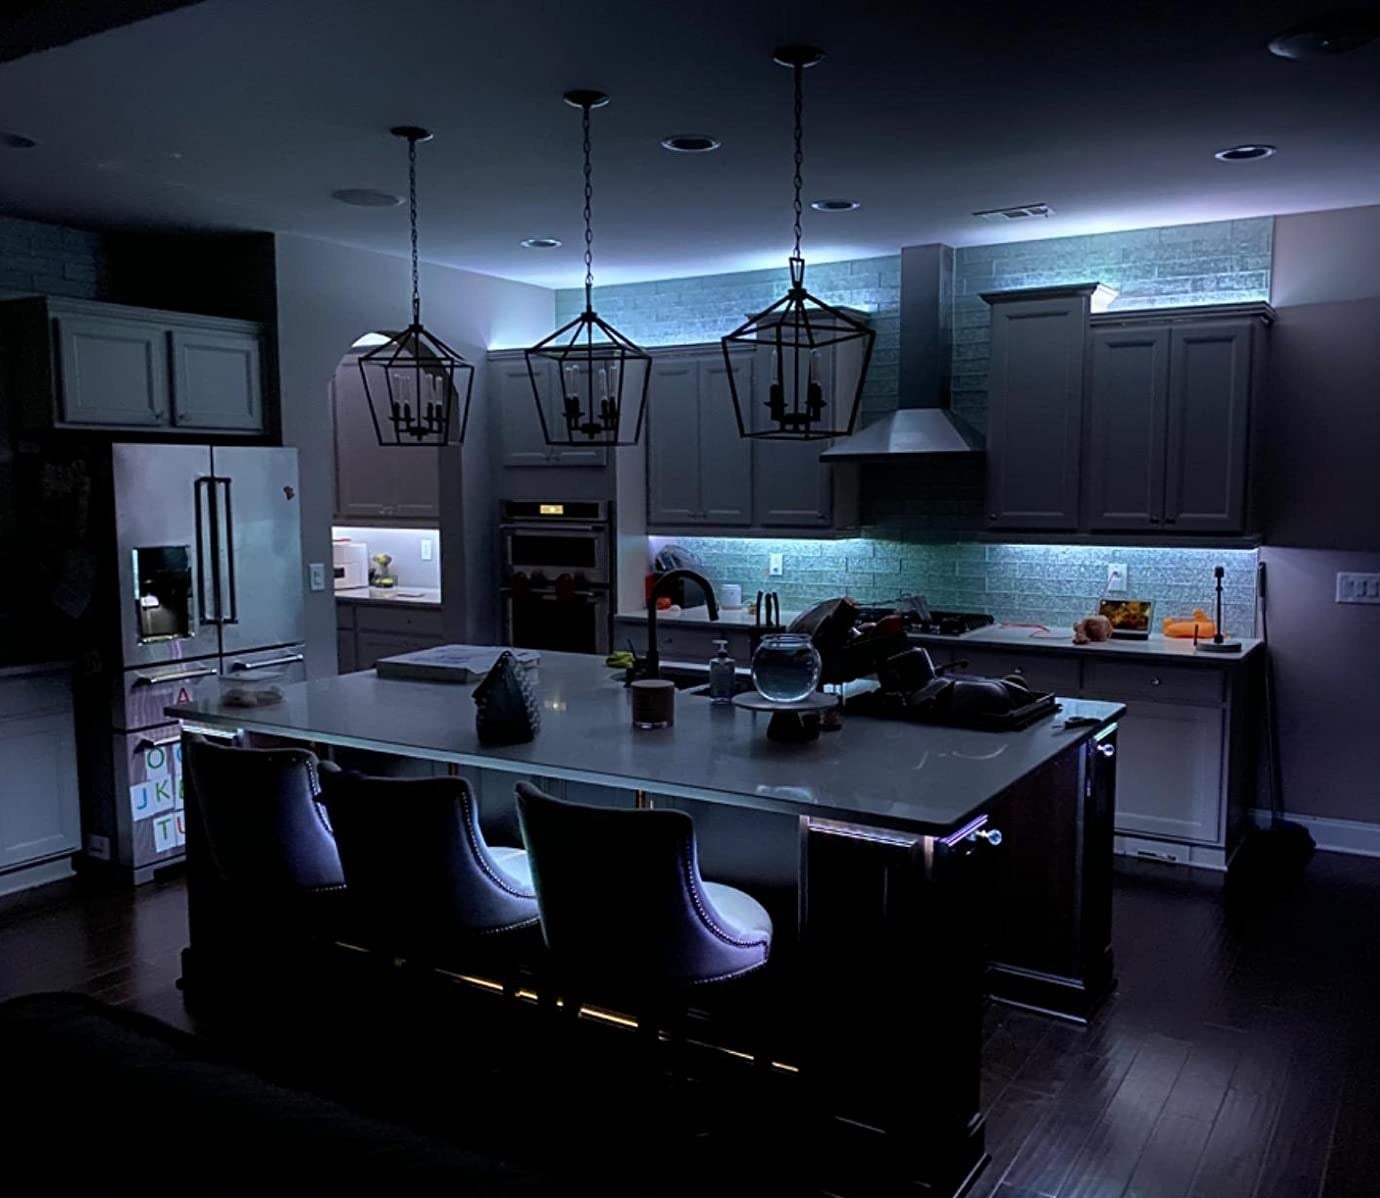 reviewer photo of the lights placed above and below their kitchen cabinets, illuminating them in light blue